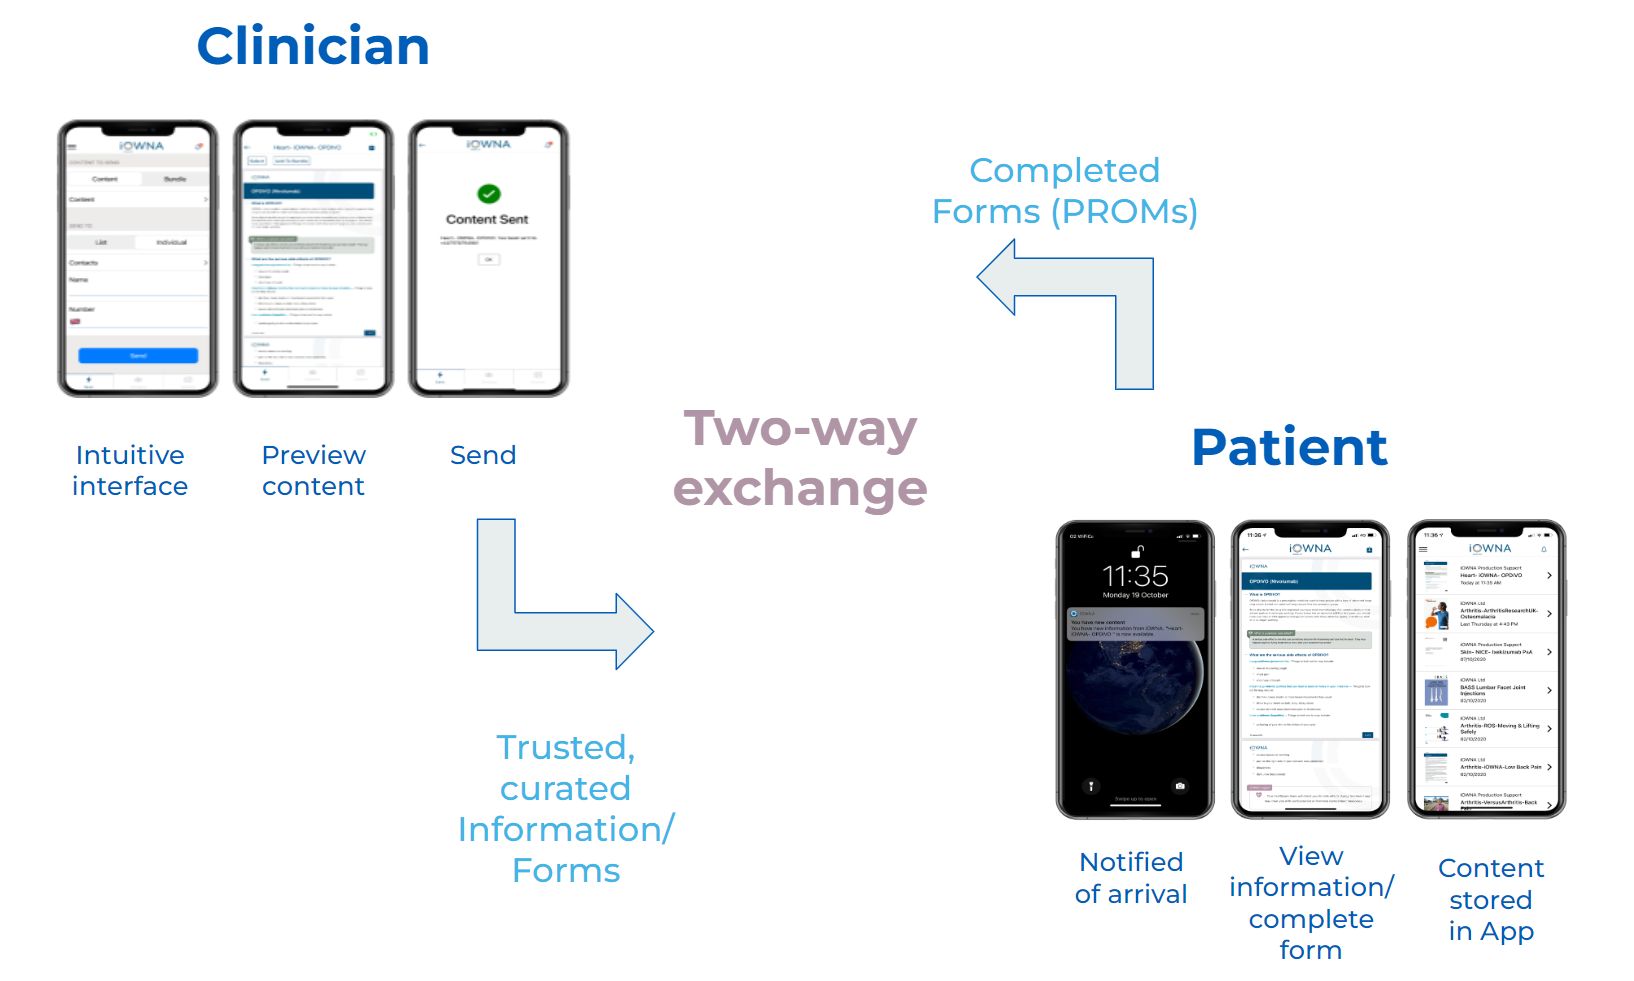 Graphic design of the interaction between a clinican and patient.